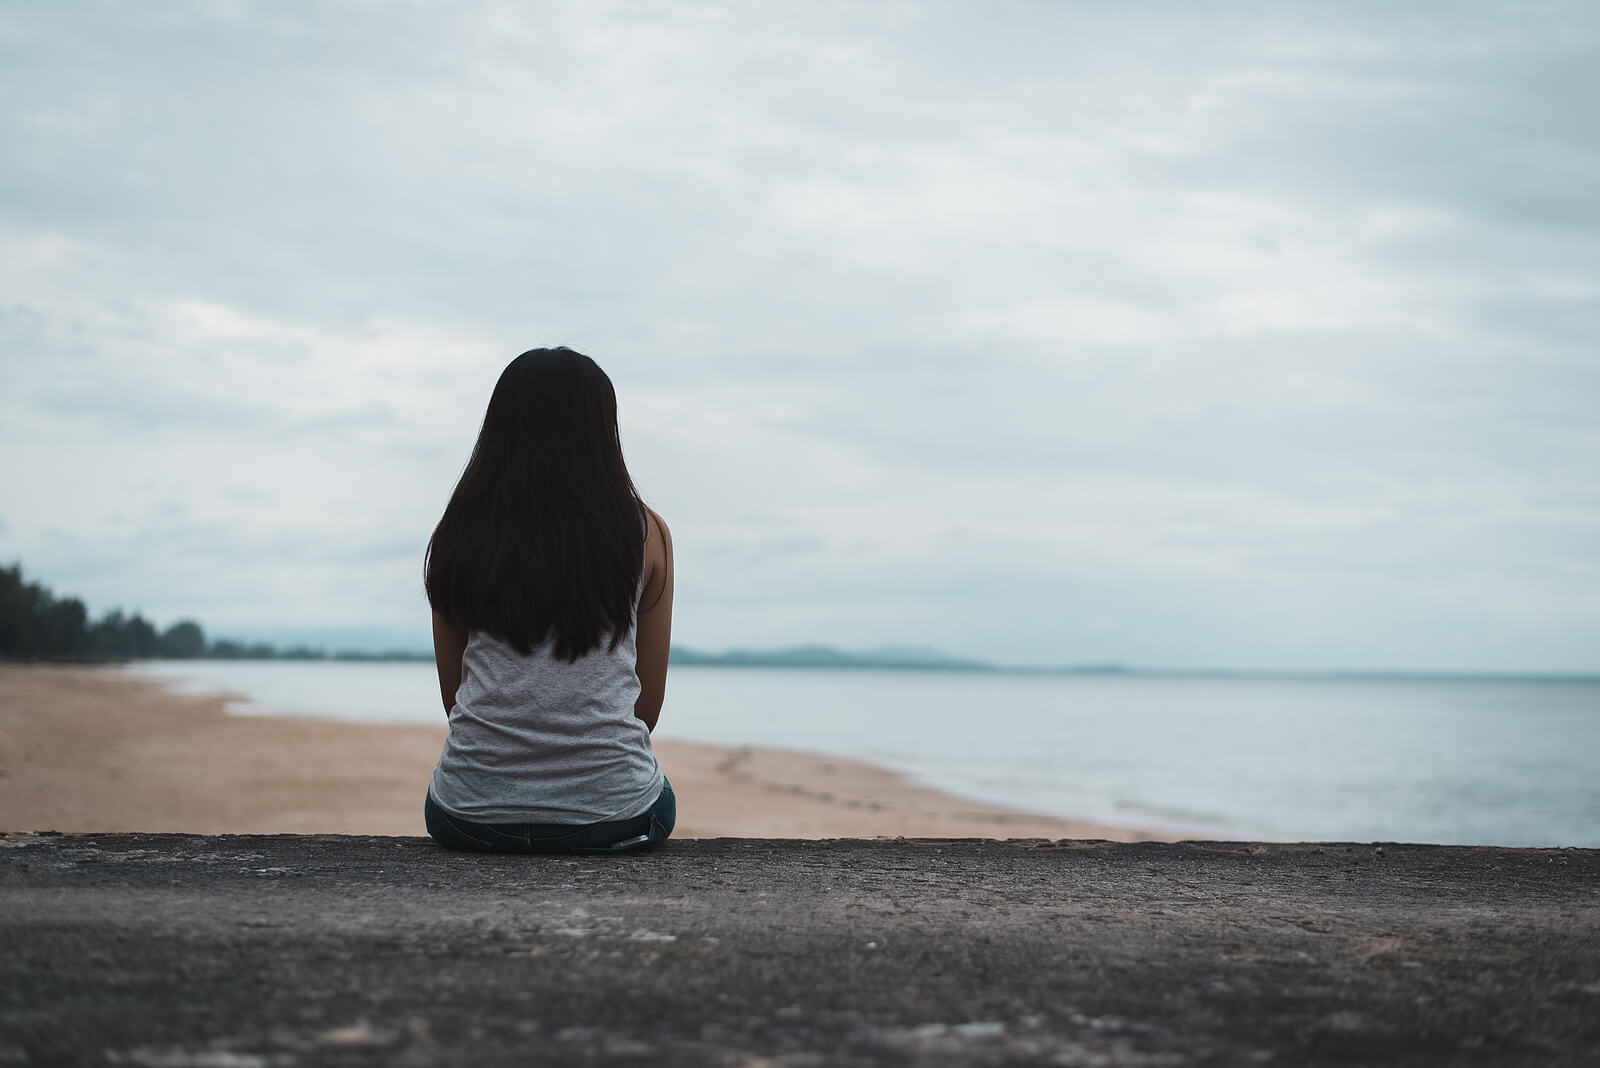 A woman sits on a log on the beach looking at the ocean. Looking to move past your relational trauma in Austin, TX? Start working with our trauma therapist in Austin, TX to heal. Call today!